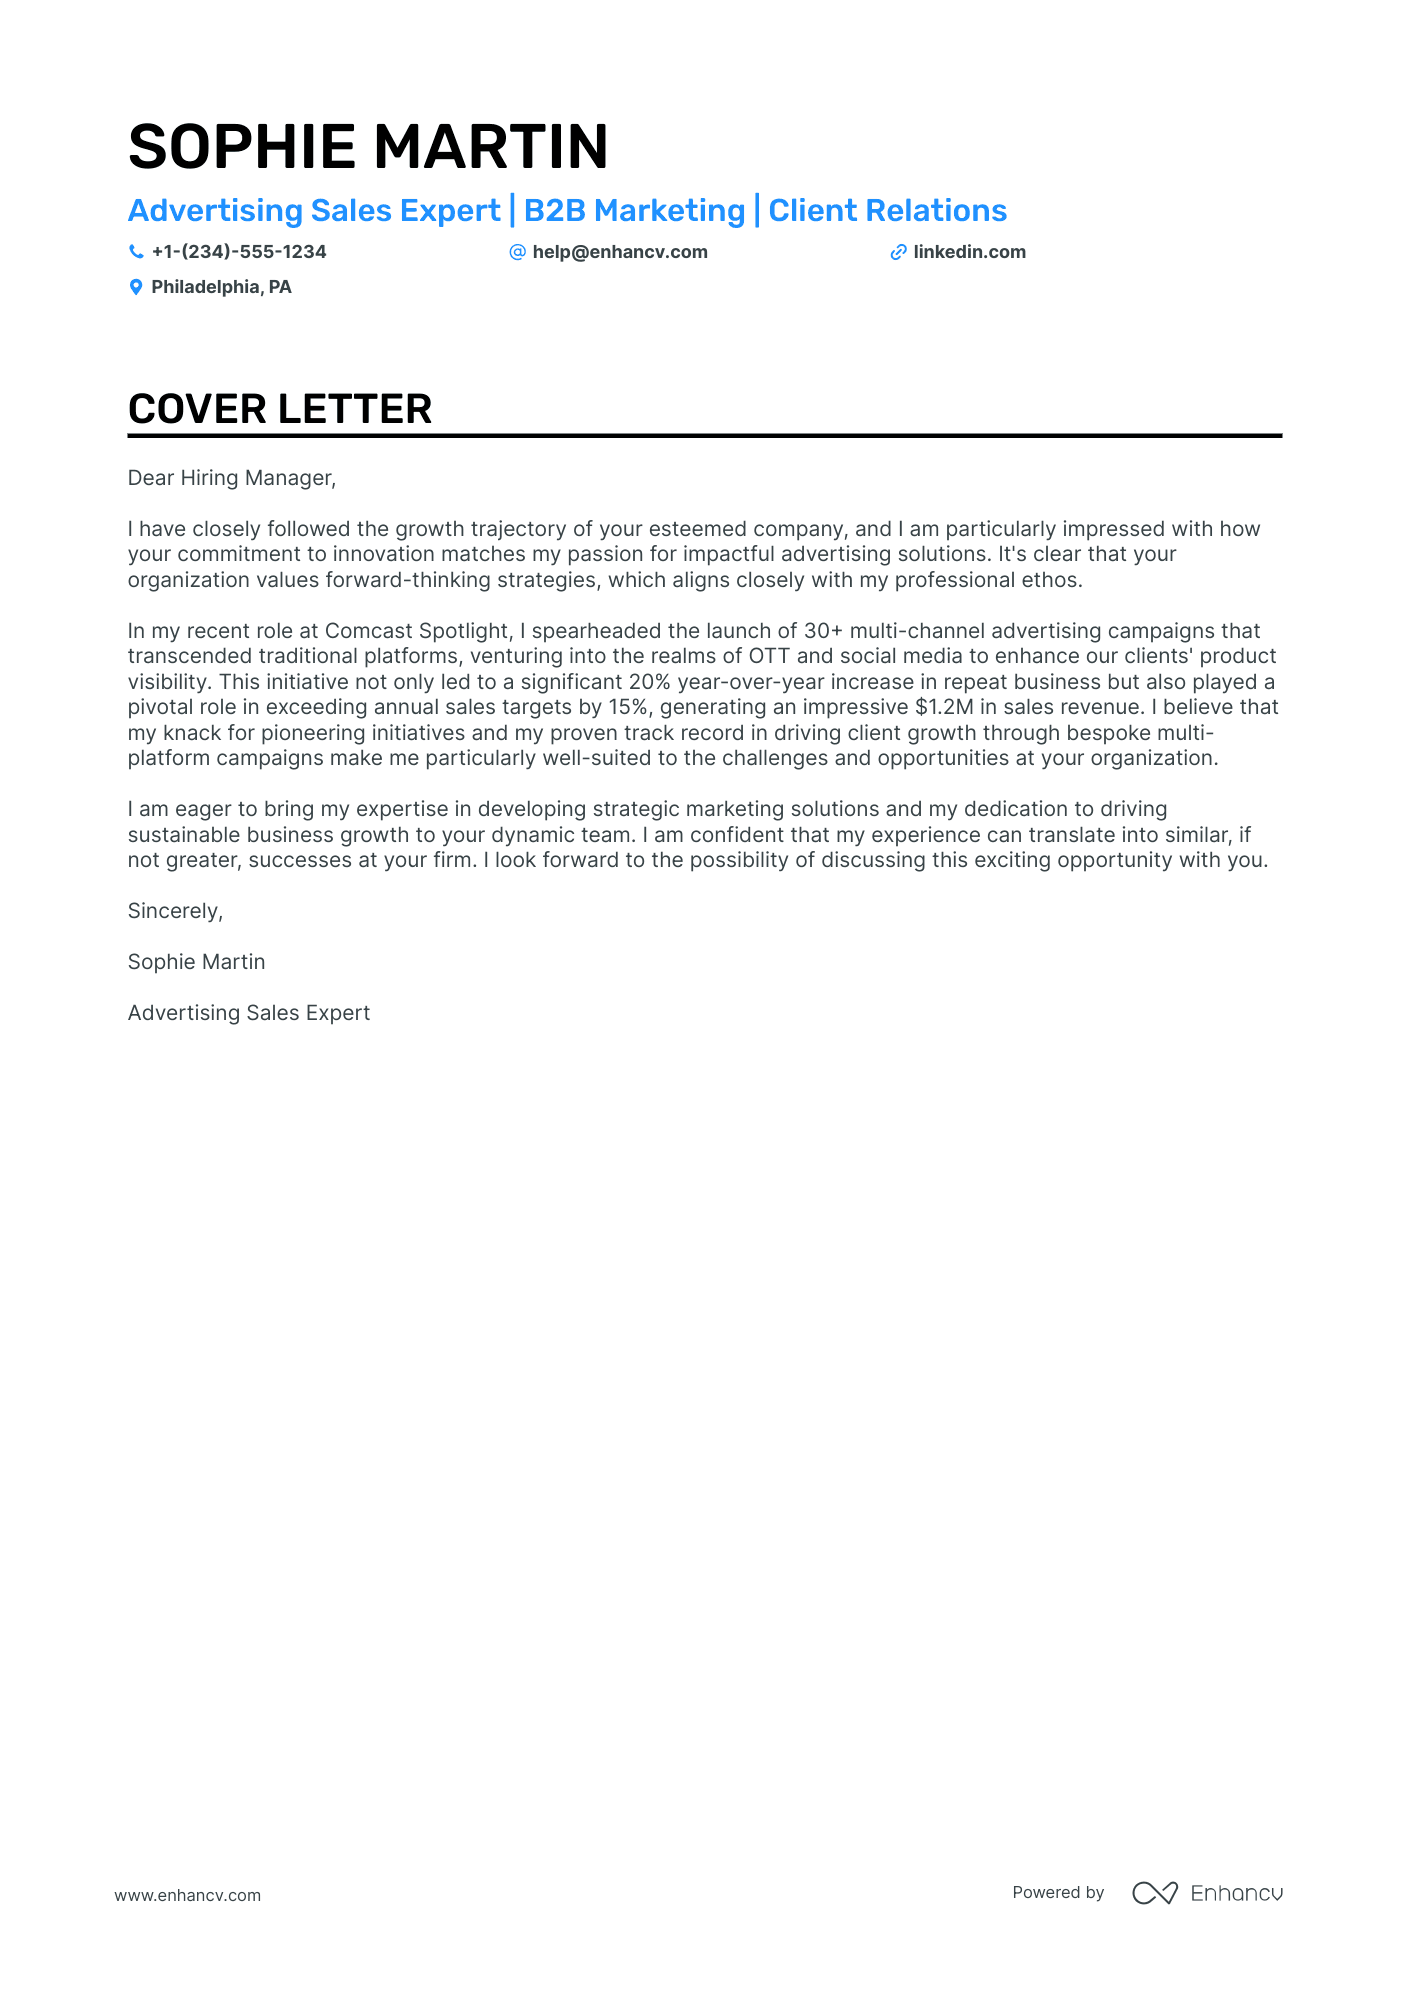 sample sales executive cover letter